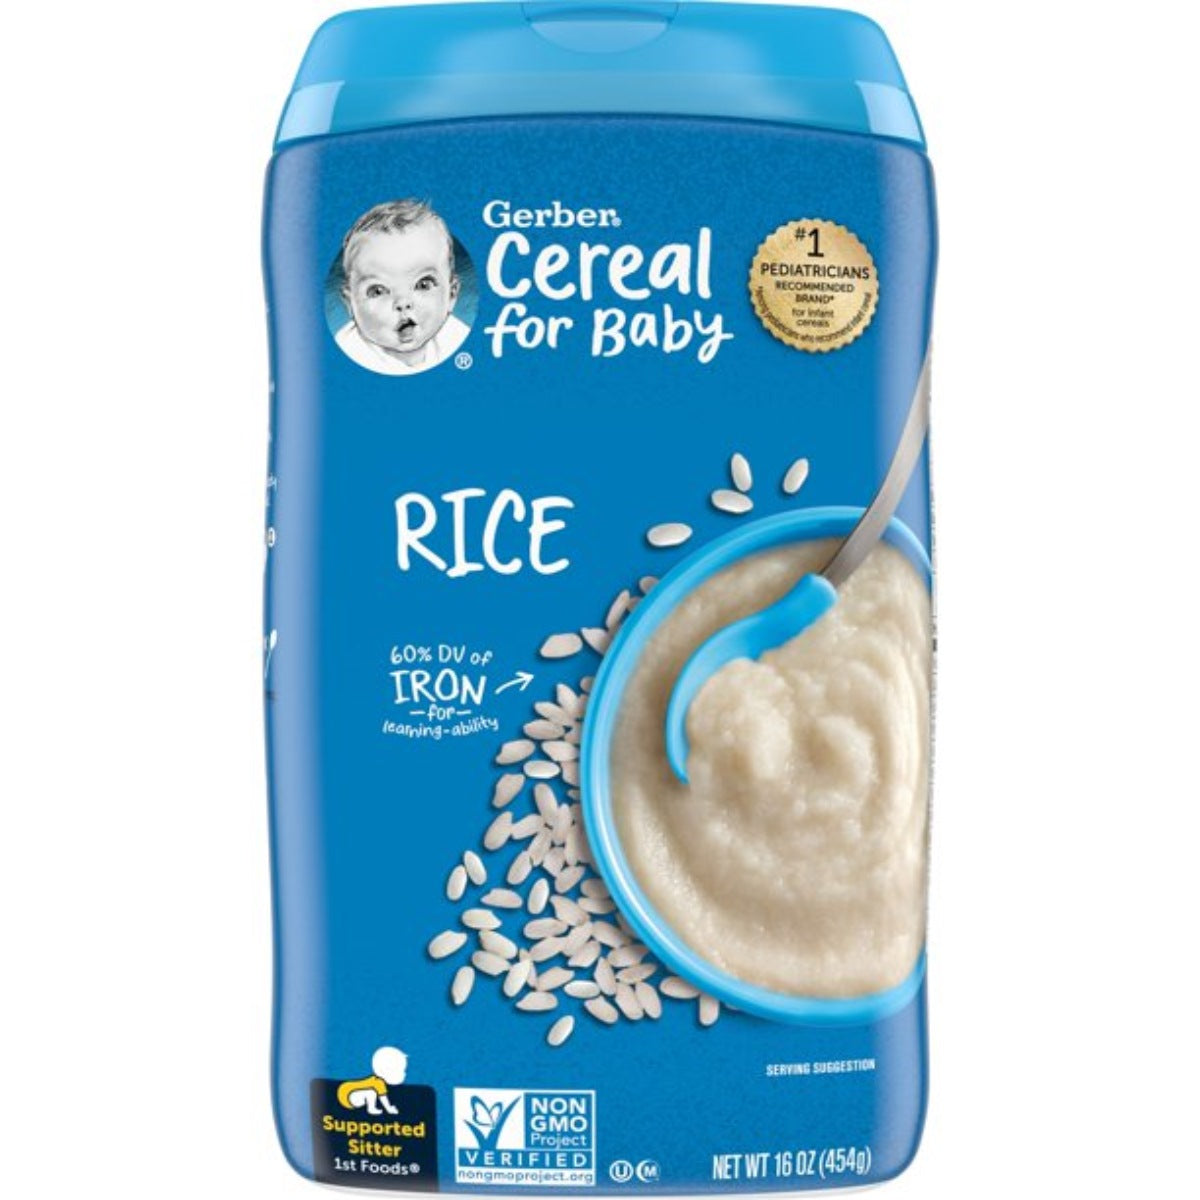 Gerber Cereal for Baby, Rice for Supported Sitter (16oz)